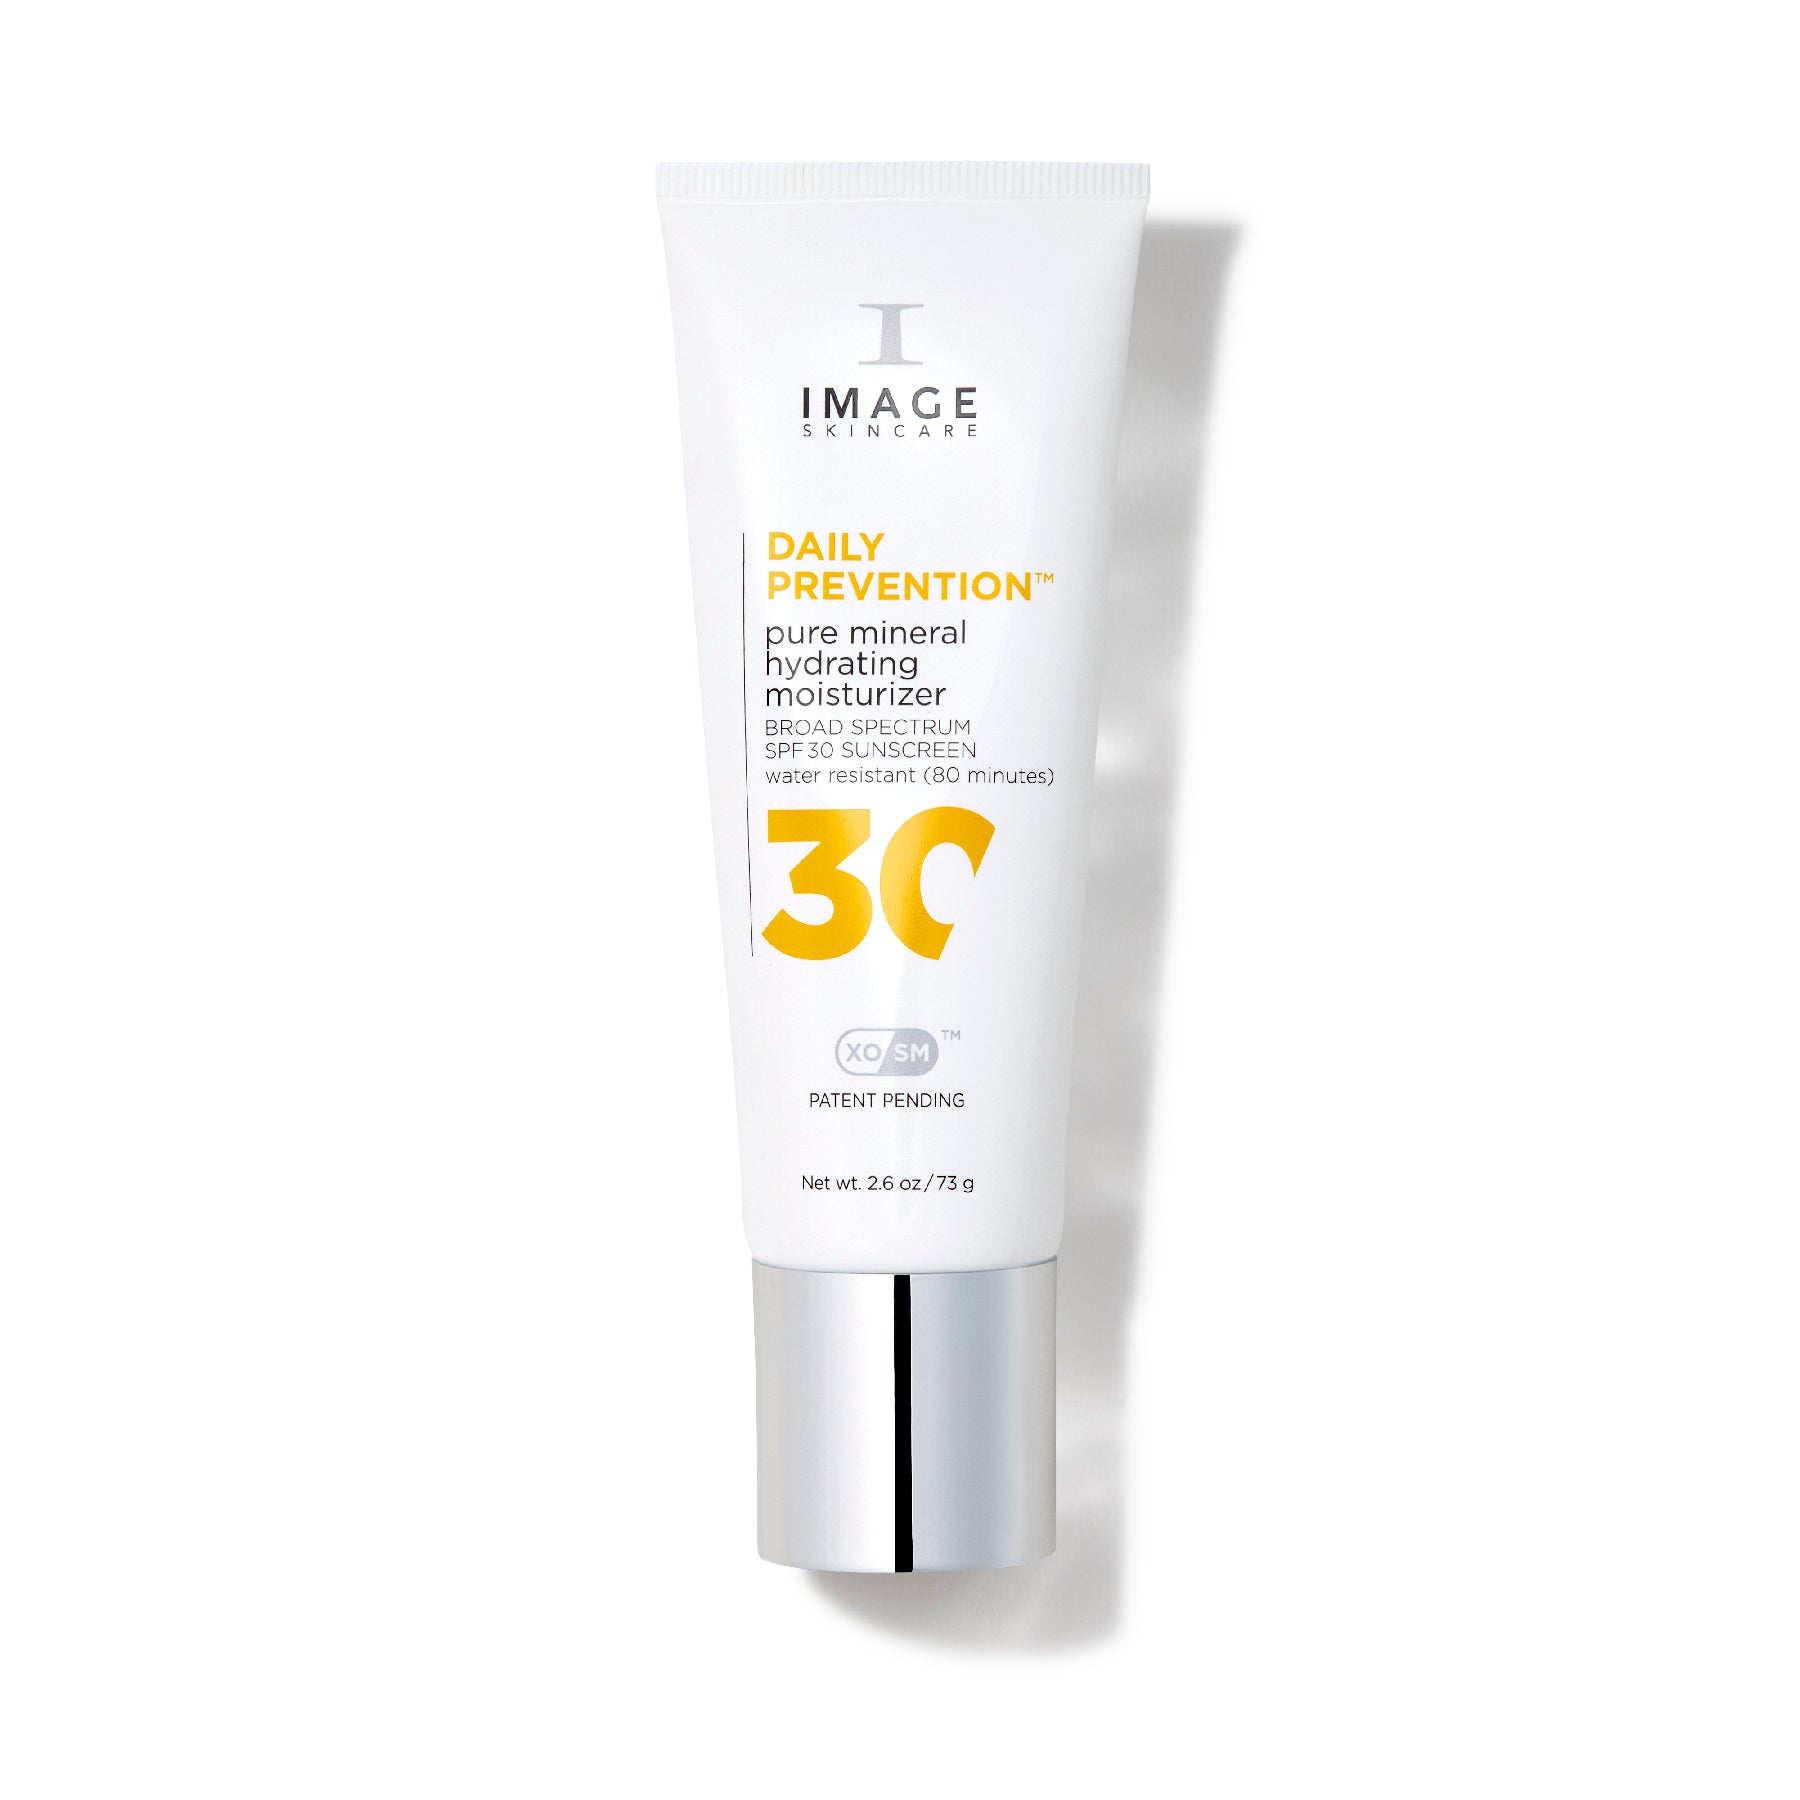 IMAGE Skincare Daily Prevention Mineral Hydrating Moisturizer SPF 30 shop at Exclusive Beauty